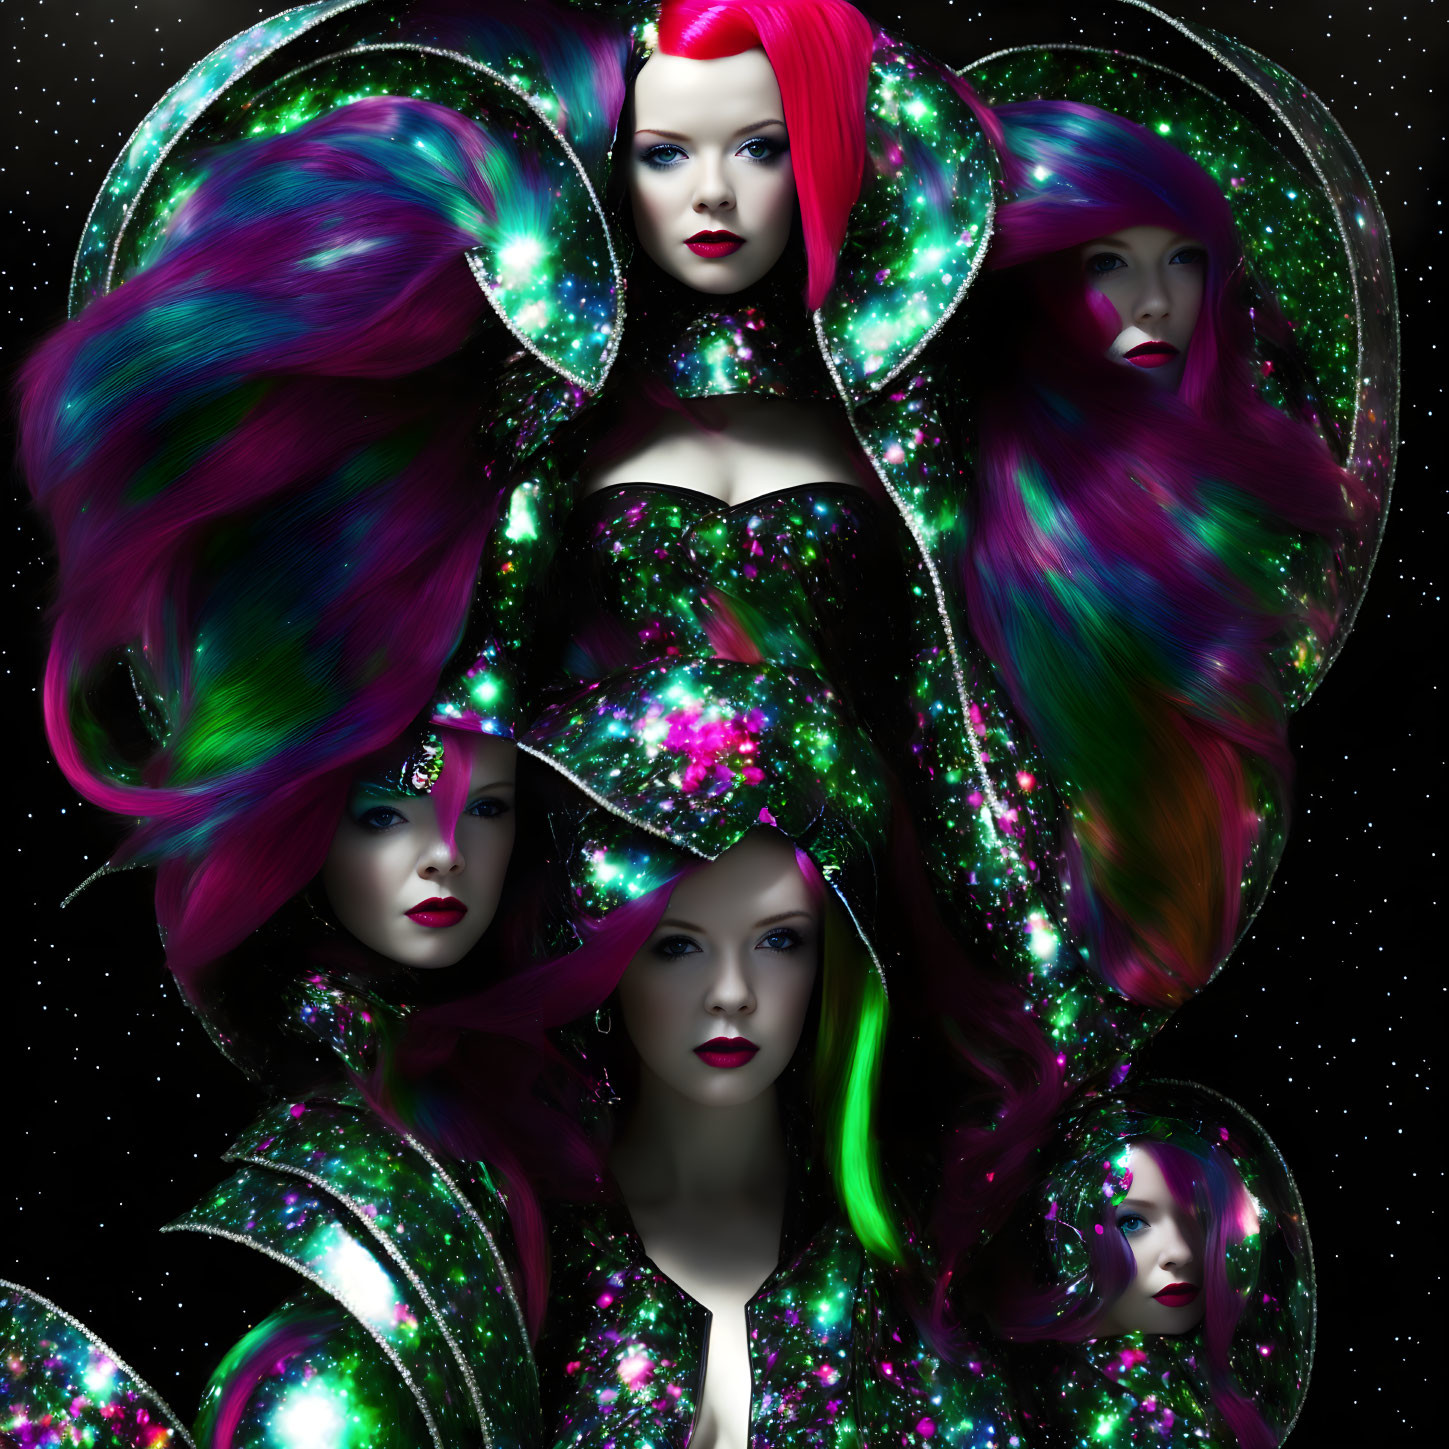 Multiple Female Figures with Pink and Purple Hair in Cosmic Artwork